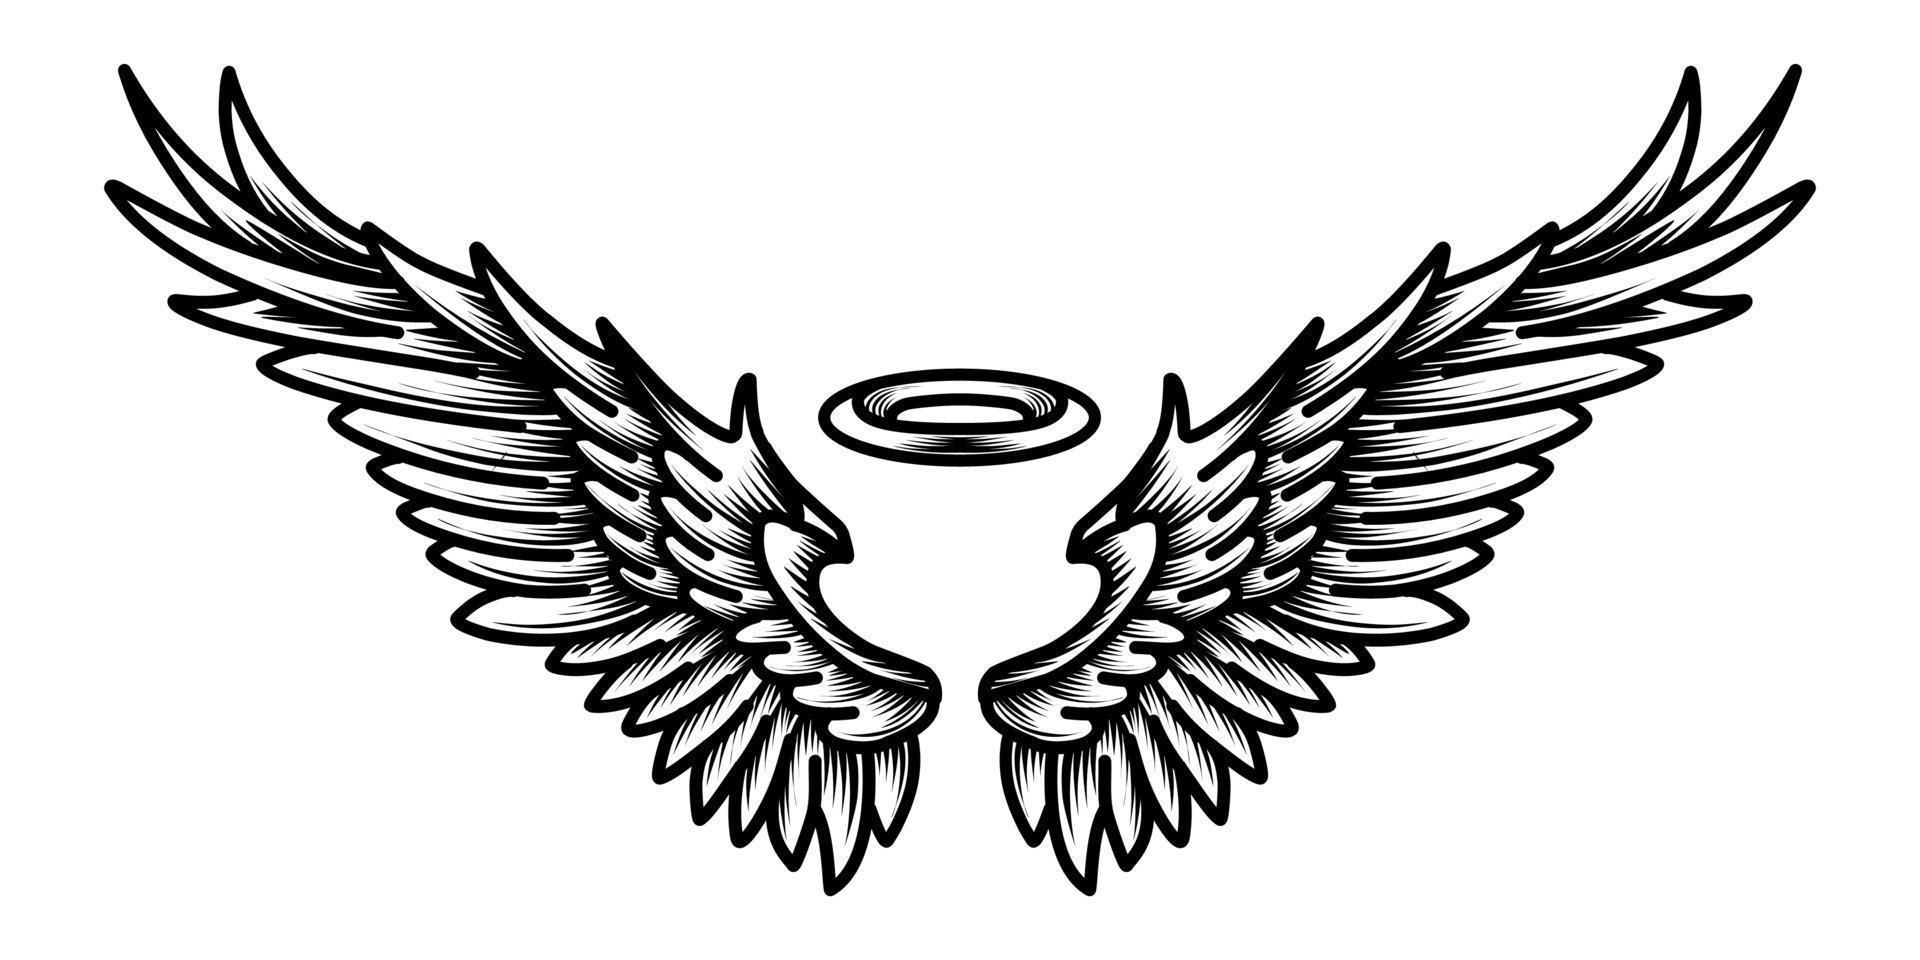 Aggregate 103+ about simple wing tattoo designs super cool -  .vn